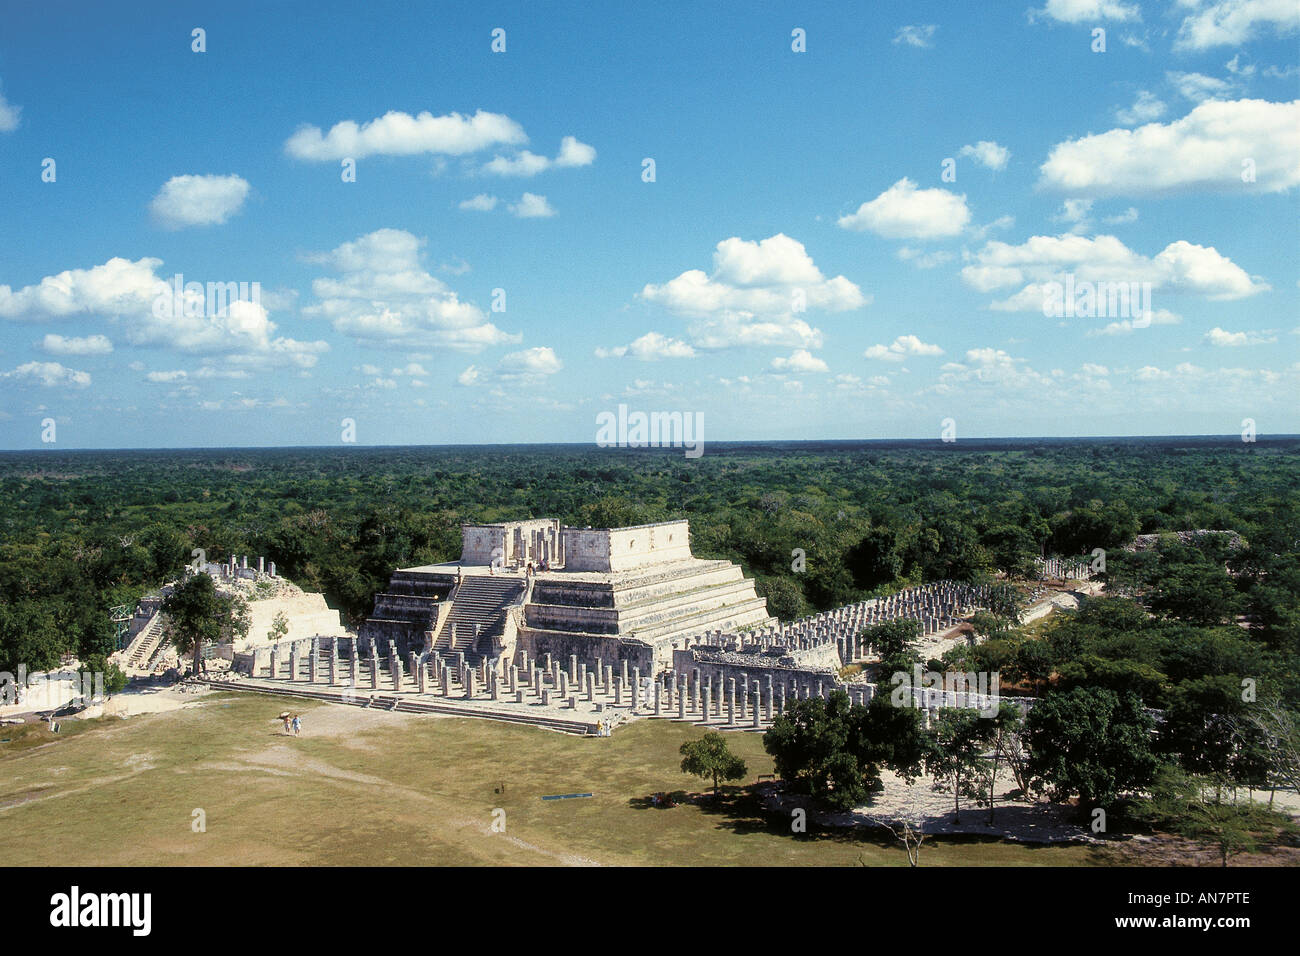 The Mayan site of Chichen Itza spreads across a plain towering over the site is the stepped structure of the Temple of the Warriors with the Court of the Thousand Columns below and the chacmool at the top of the stairs Stock Photo